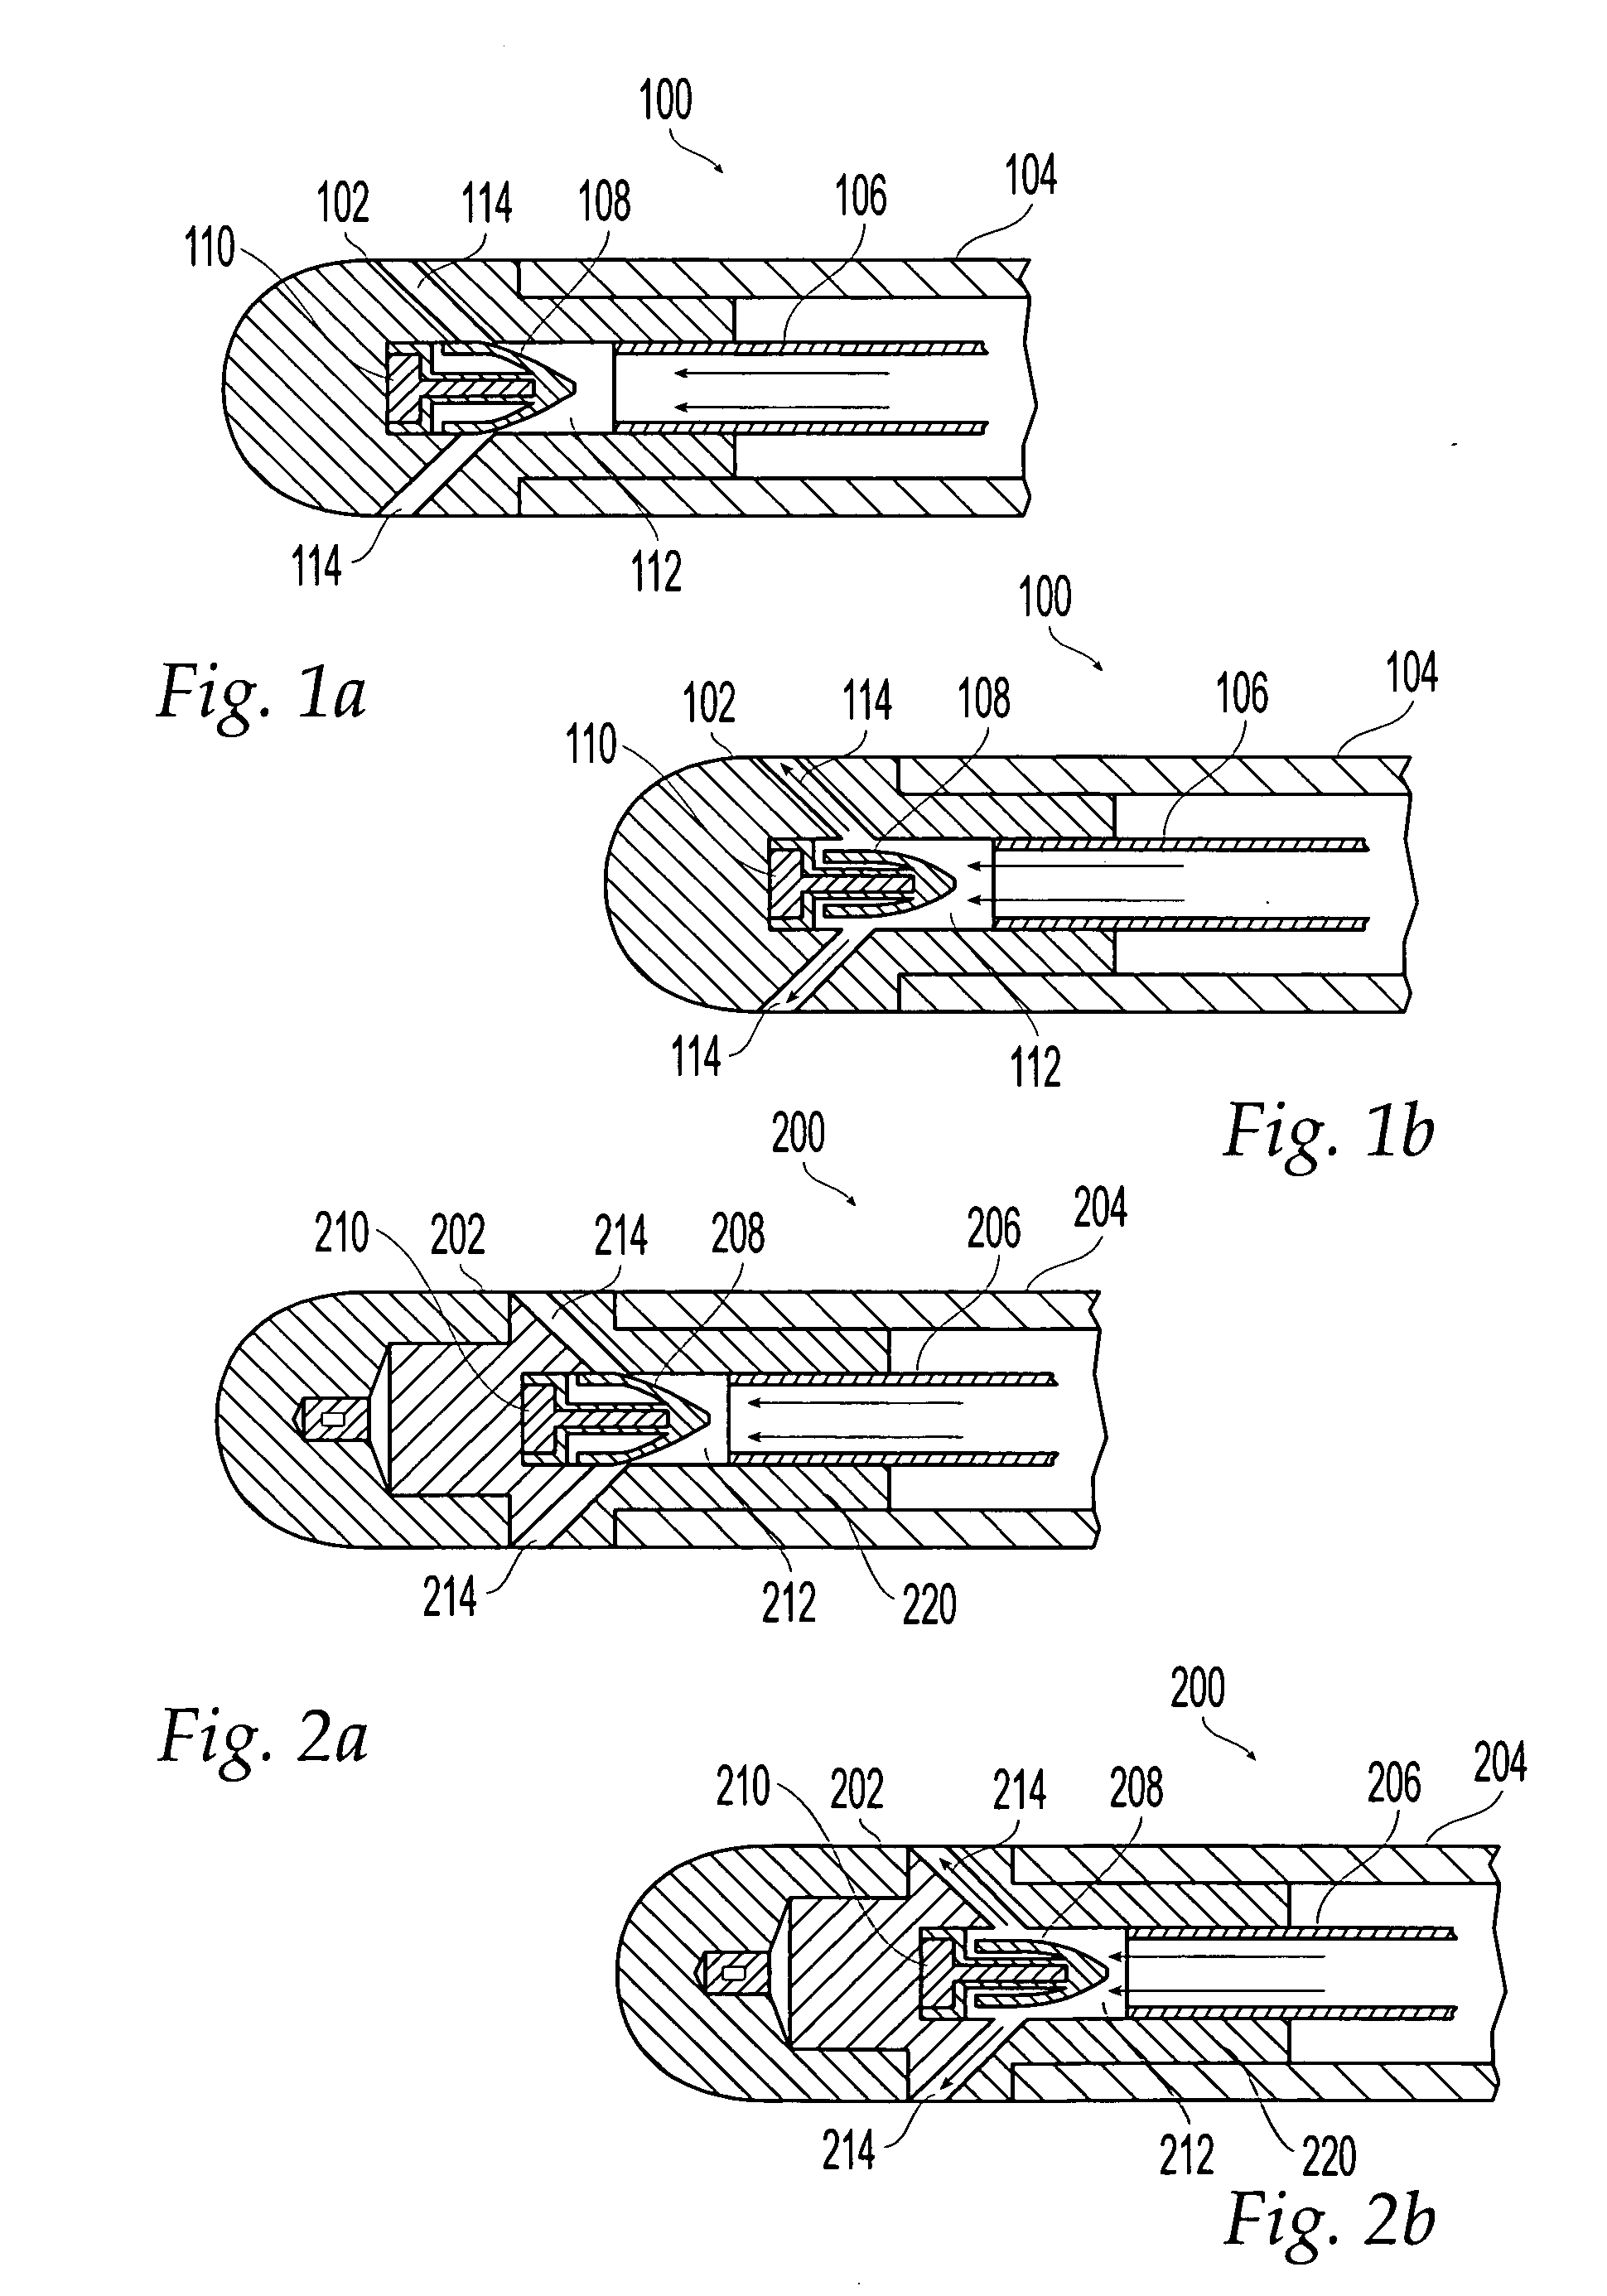 Irrigated ablation catheter having a valve to prevent backflow